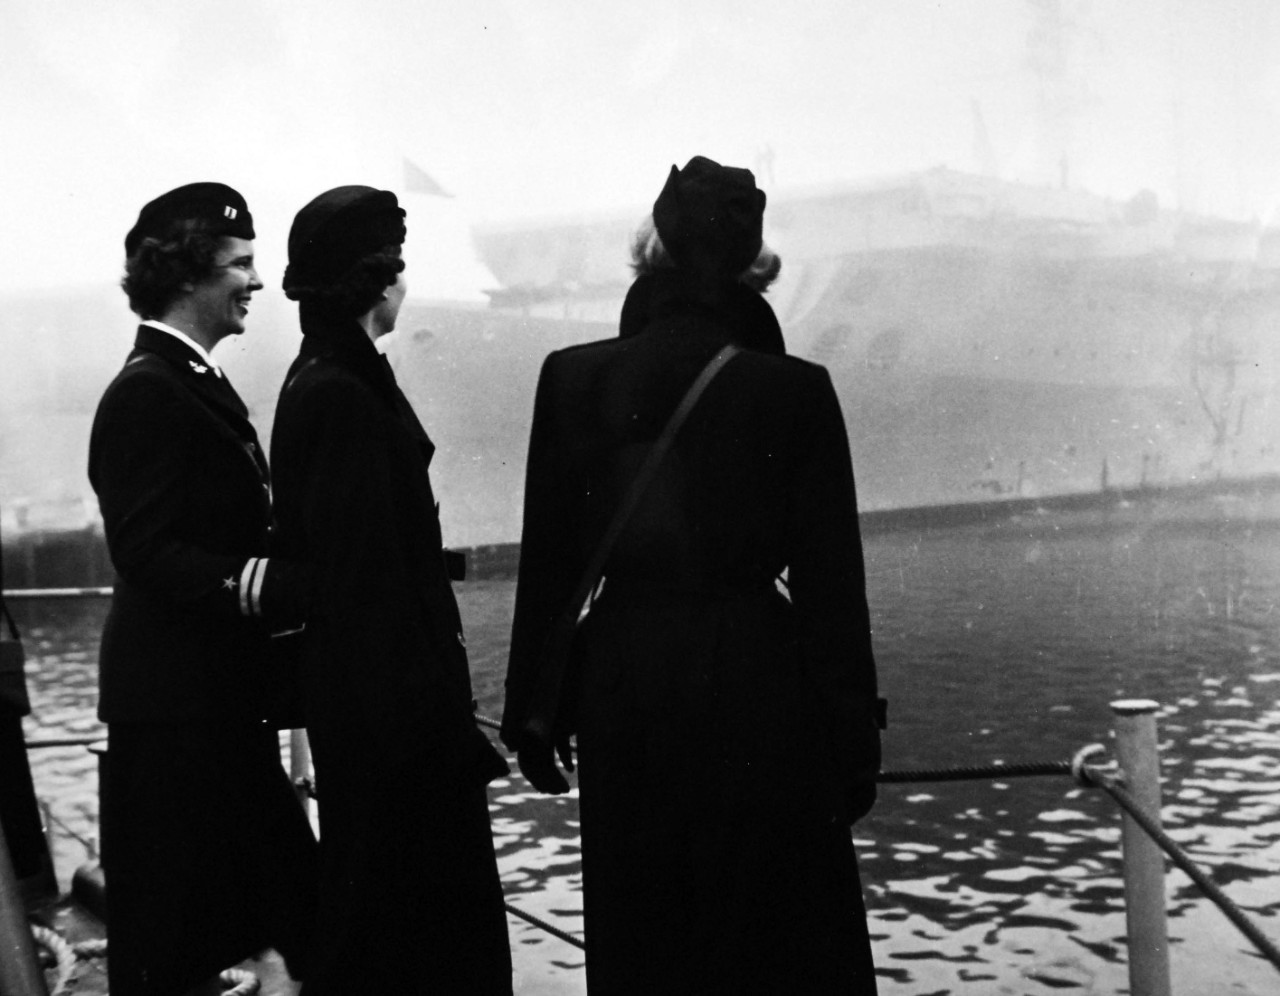 USN 708499:   “Return to Base”, January 1952.    WAVES back on board the LSI for their return trip to the Naval Training Base at Newport, Rhode Island, the WAVE officers had a clear picture of how the ships of the fleet operate while at sea.  Lieutenant Anne Ducey, Officer in Charge of the Visitors, and Ensigns Elizabeth A. Harris and Eva Schekorra watched the fog settle from their floating classrooms in the background.  The WAVES felt more fully prepared for future class studies after “joining” the Fleet.   Photograph released January 21, 1952.  Official U.S. Navy photograph, now in the collections of the National Archives.  